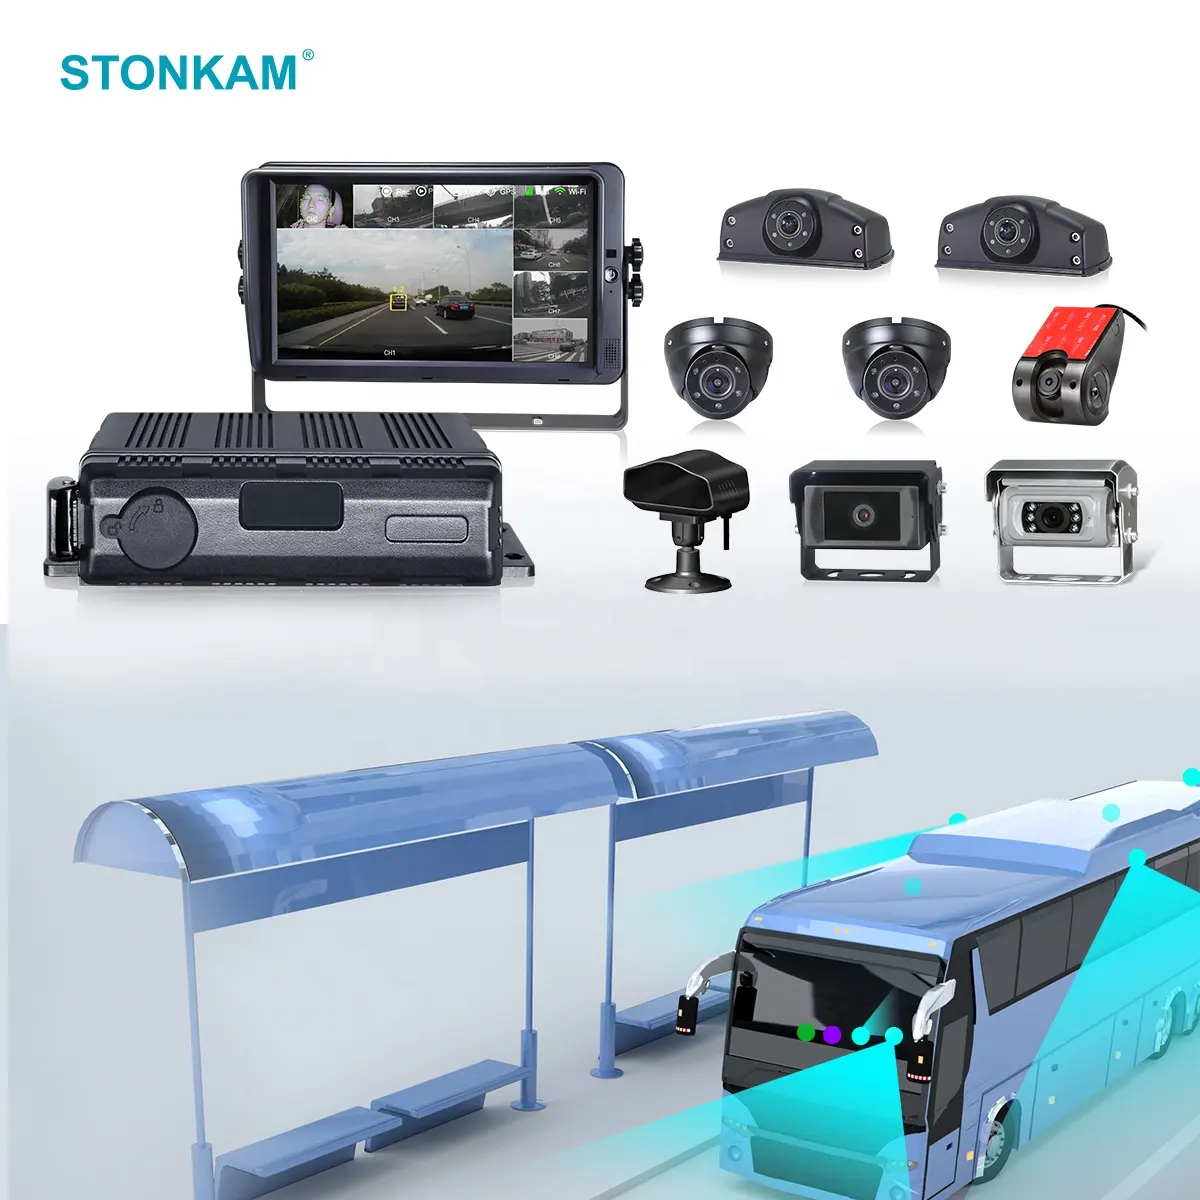 STONKAM 8 Channel vehicle tracking system car dvr 8ch Truck/Taxi/Bus Camera System mdvr Kits